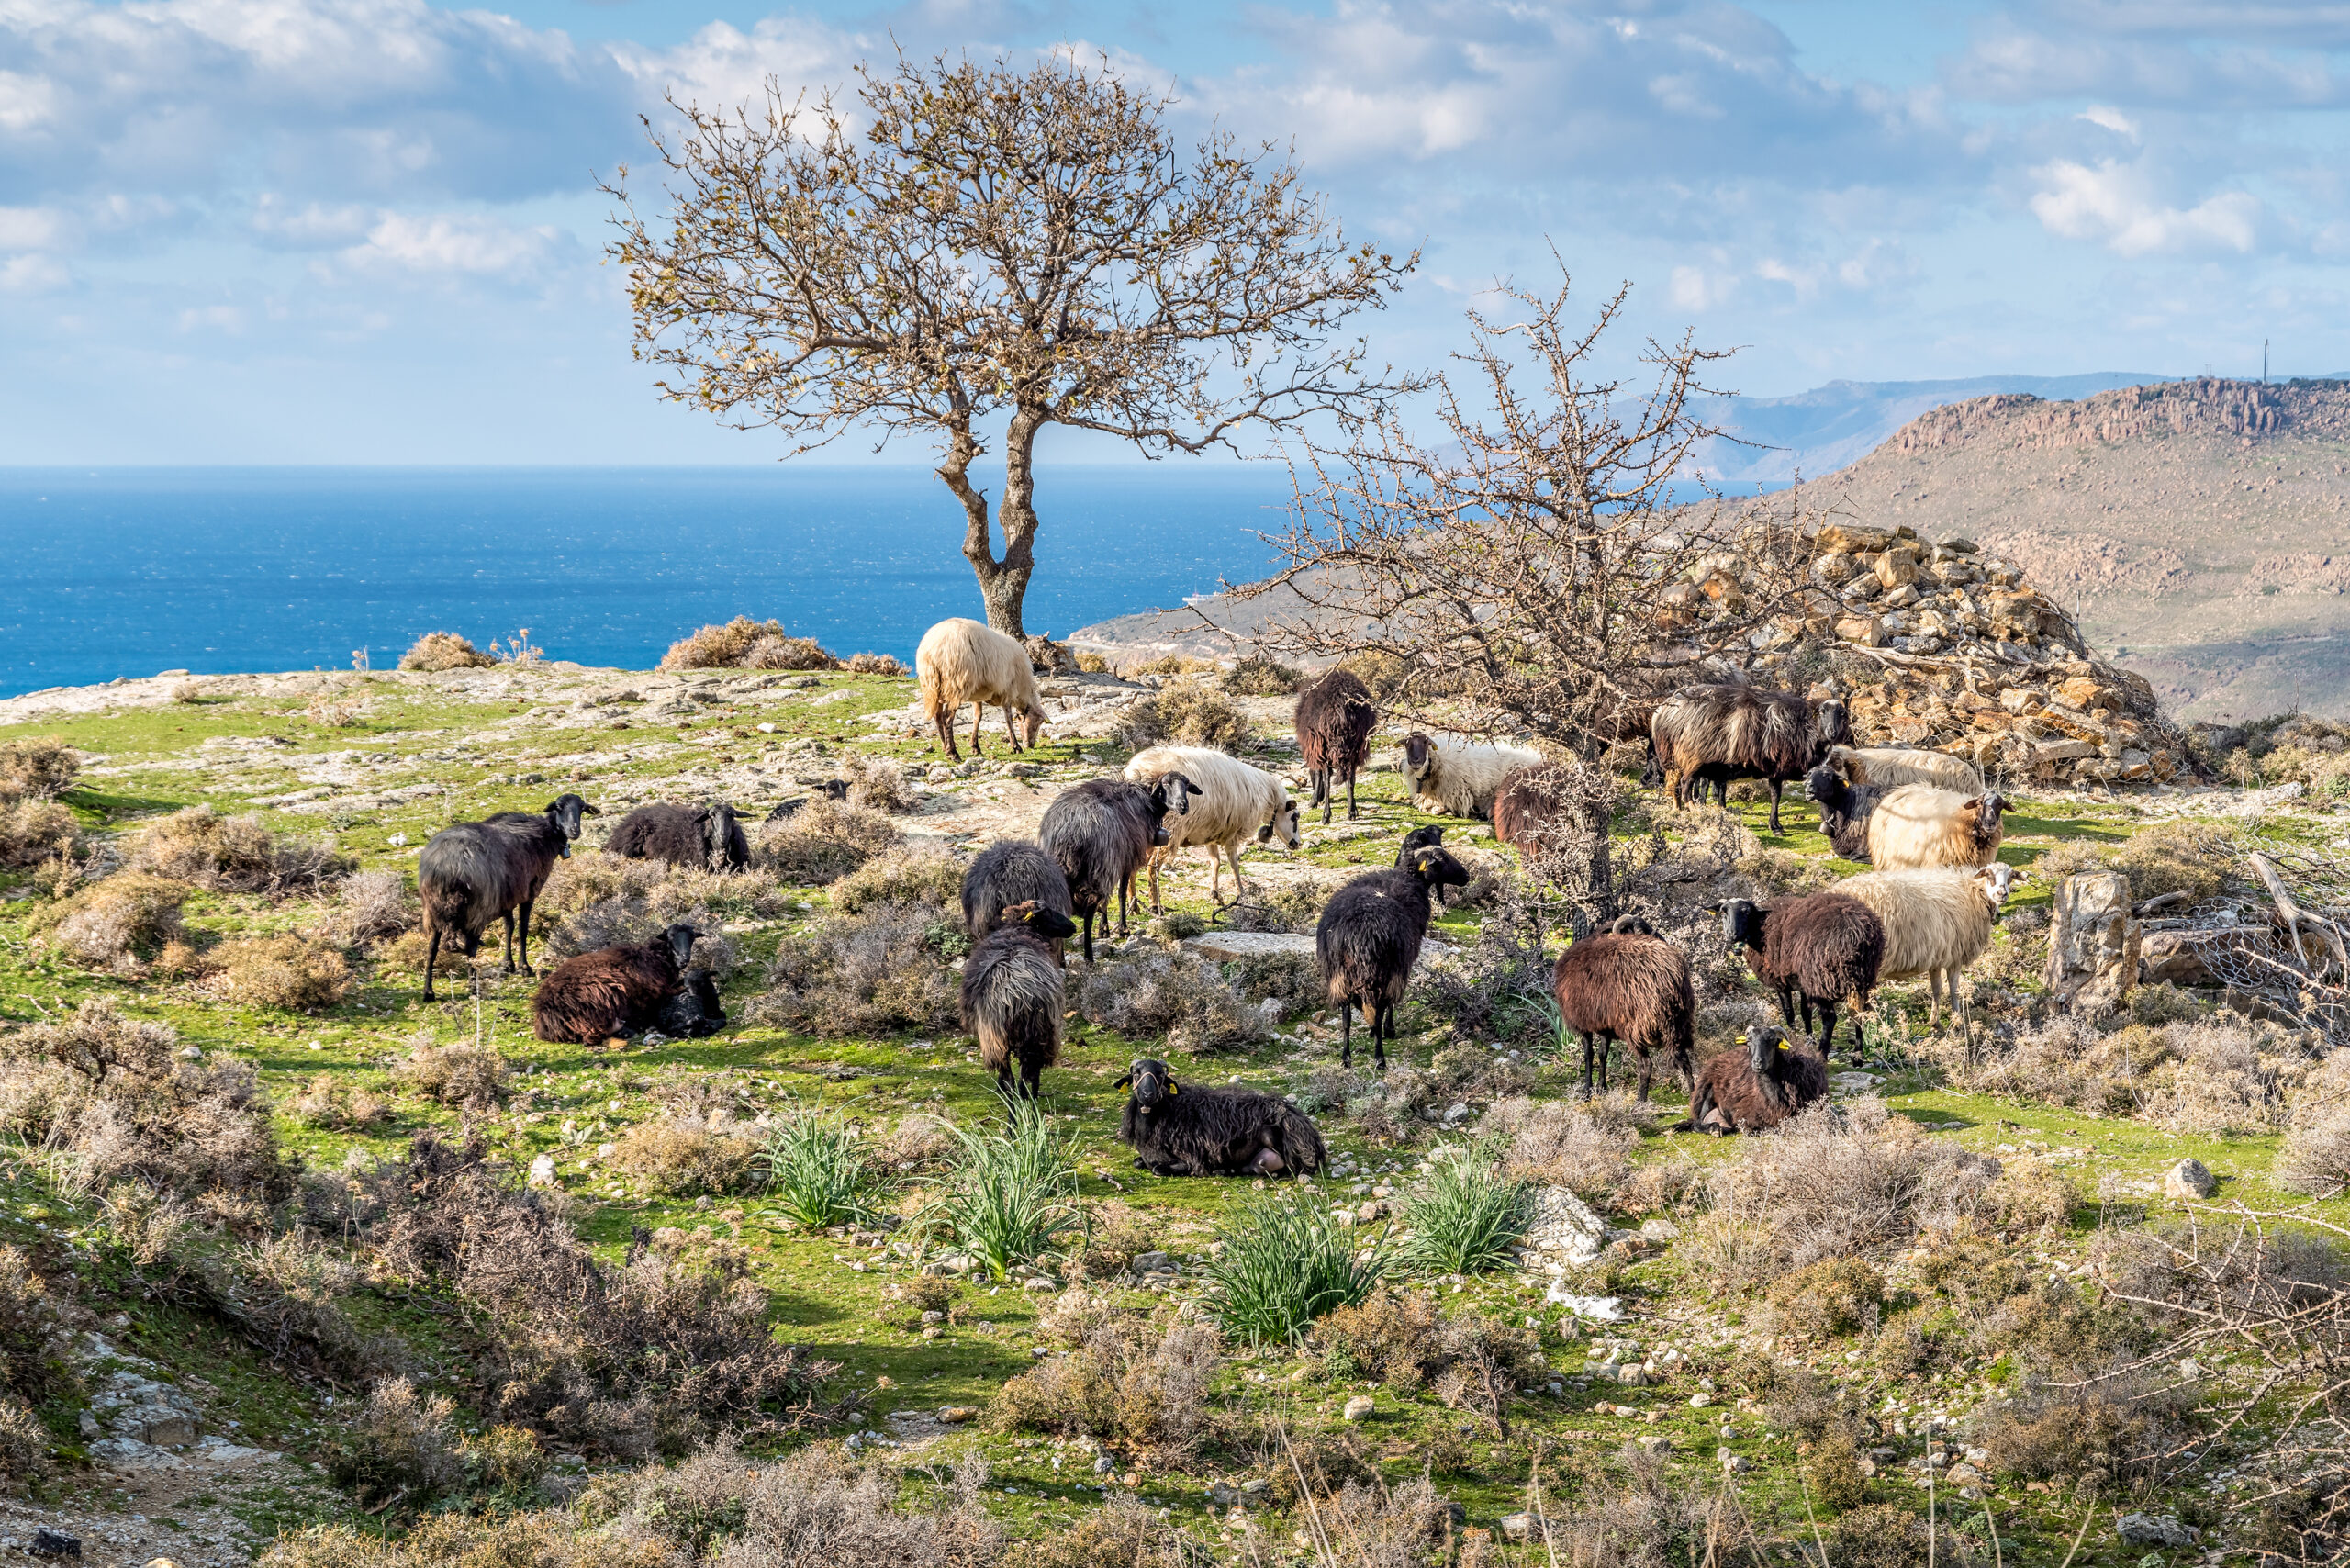 Sustainable Travel to Greece? Discover the Authentic Island of Lesvos